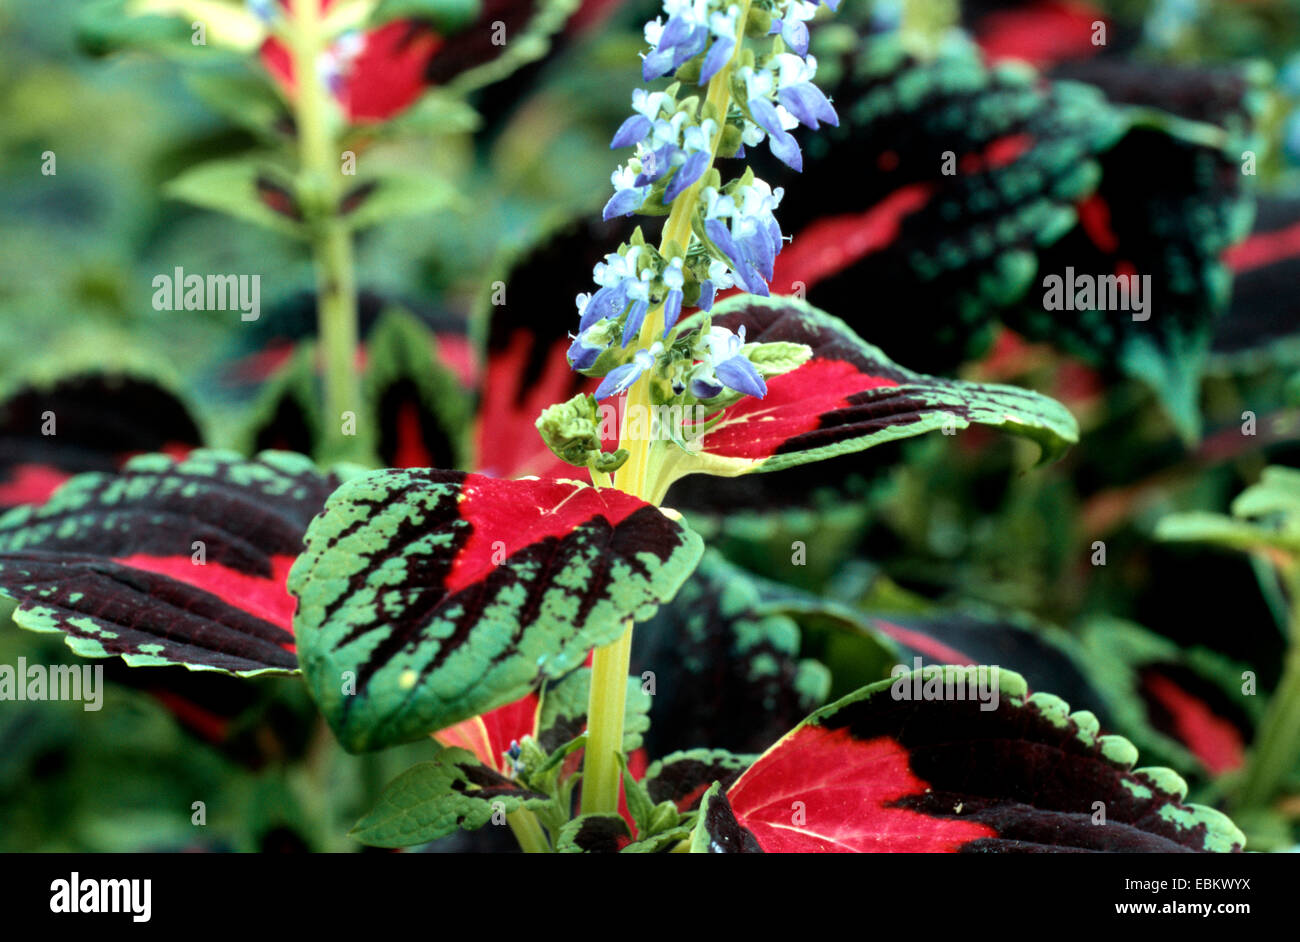 Coleus Blumei High Resolution Stock Photography And Images Alamy